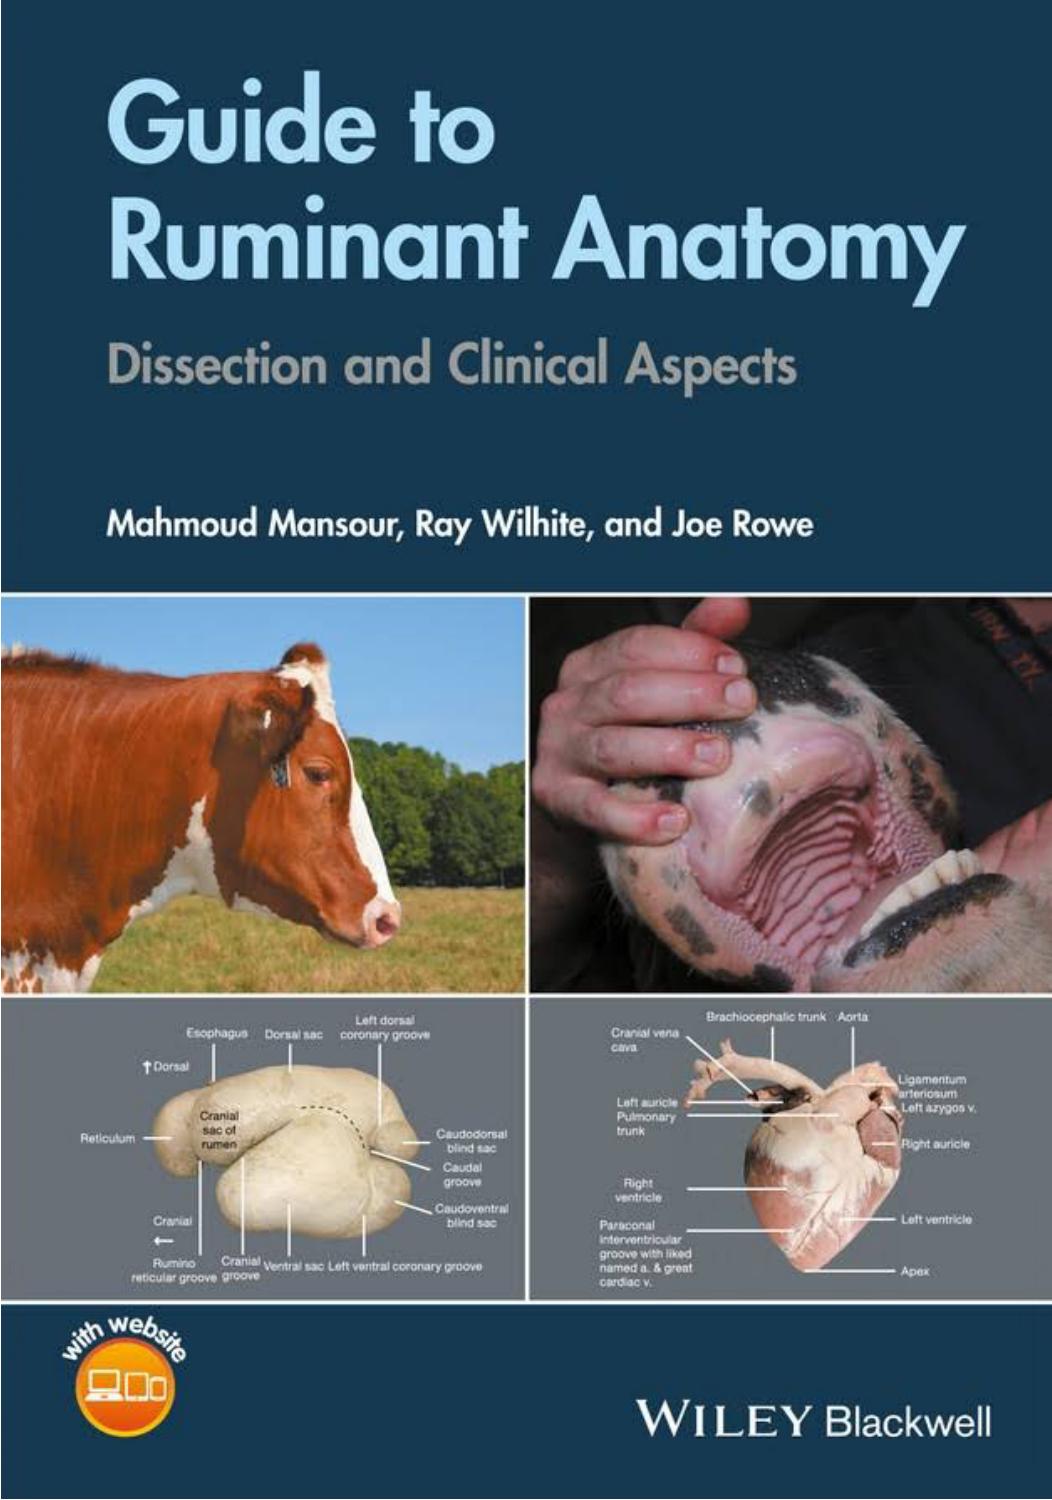 Guide to Ruminant Anatomy, Dissection and Clinical Aspects